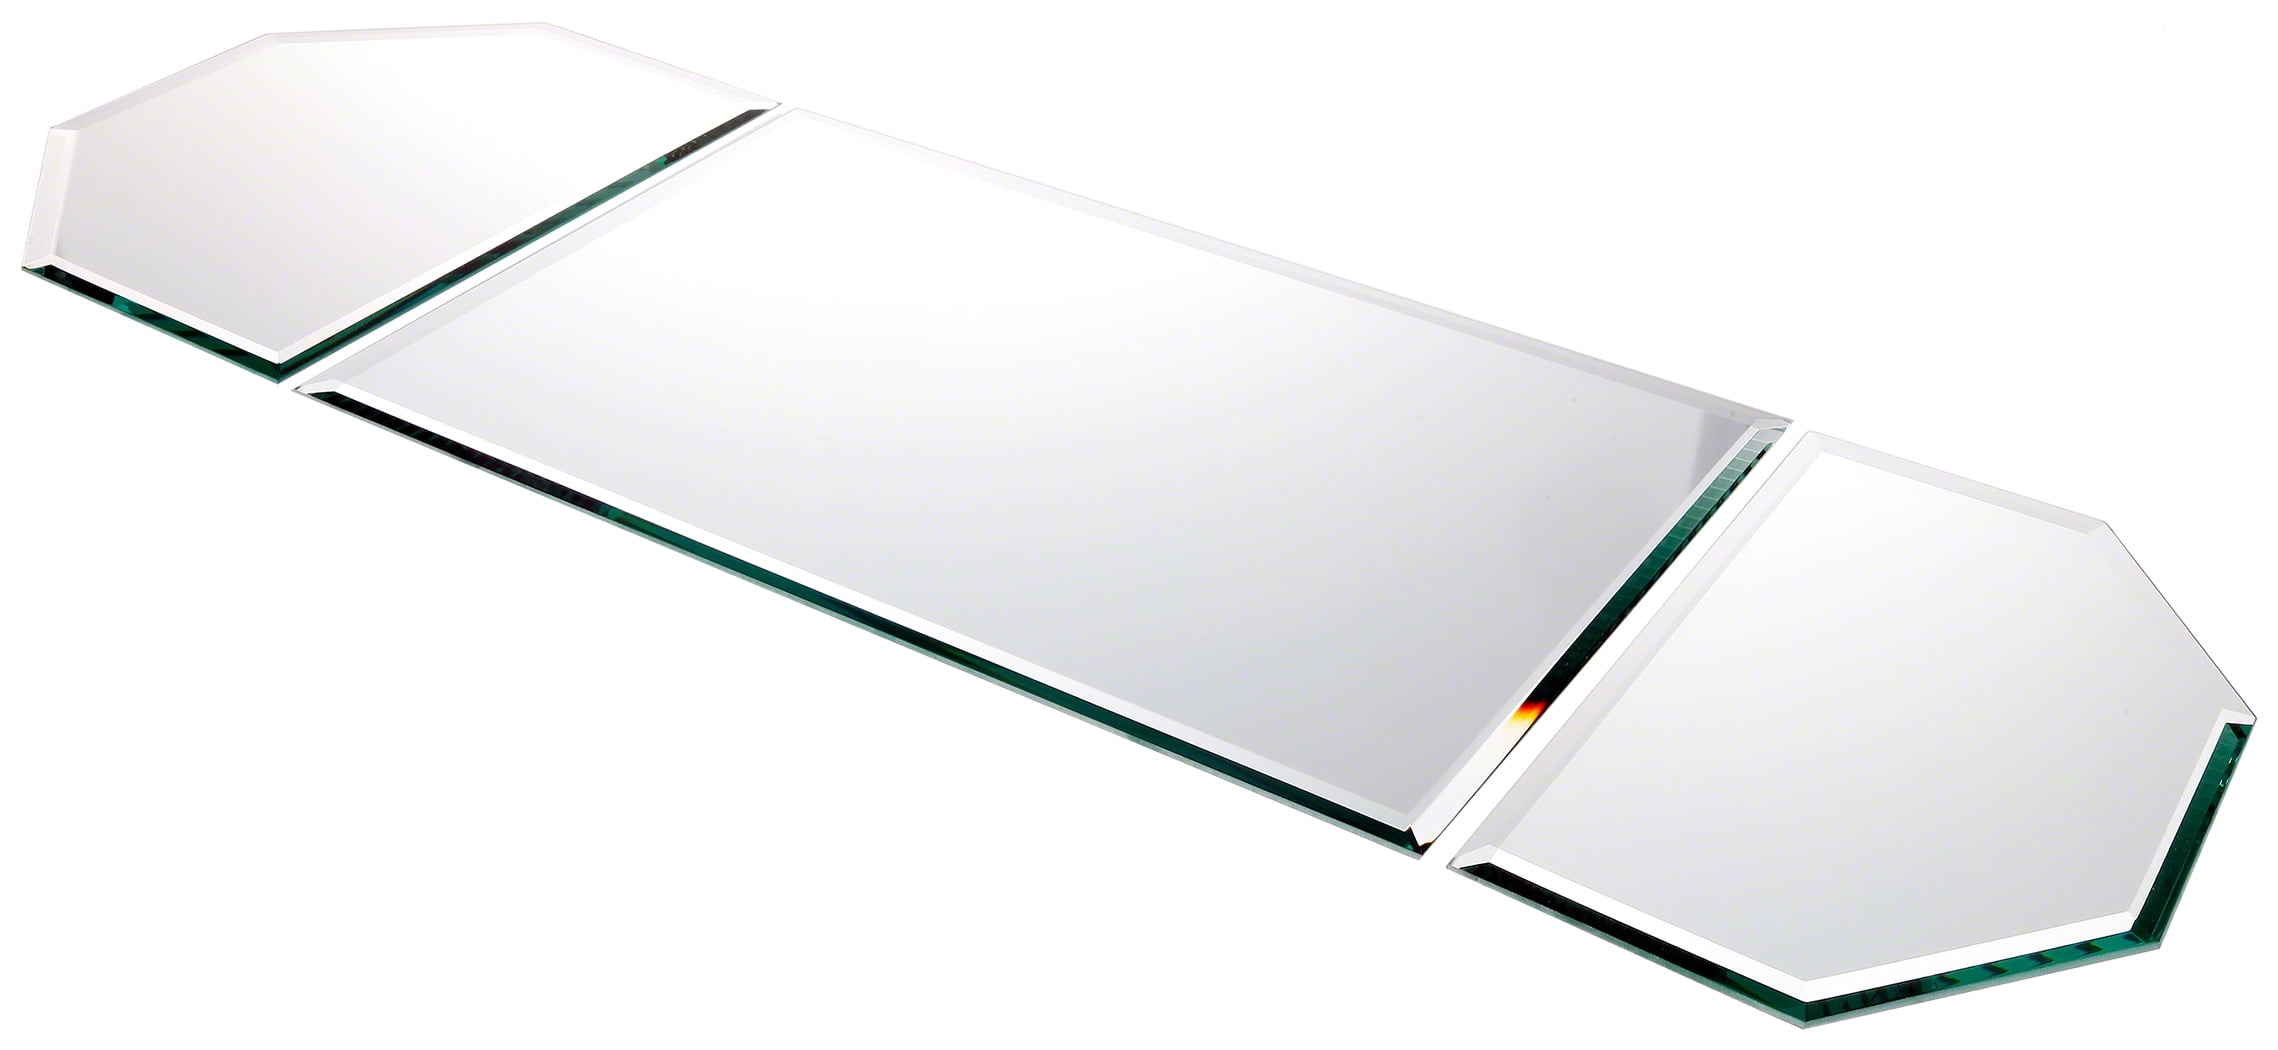 Plymor Square 3mm Beveled Glass Mirror 3.5 inch x 3.5 inch 